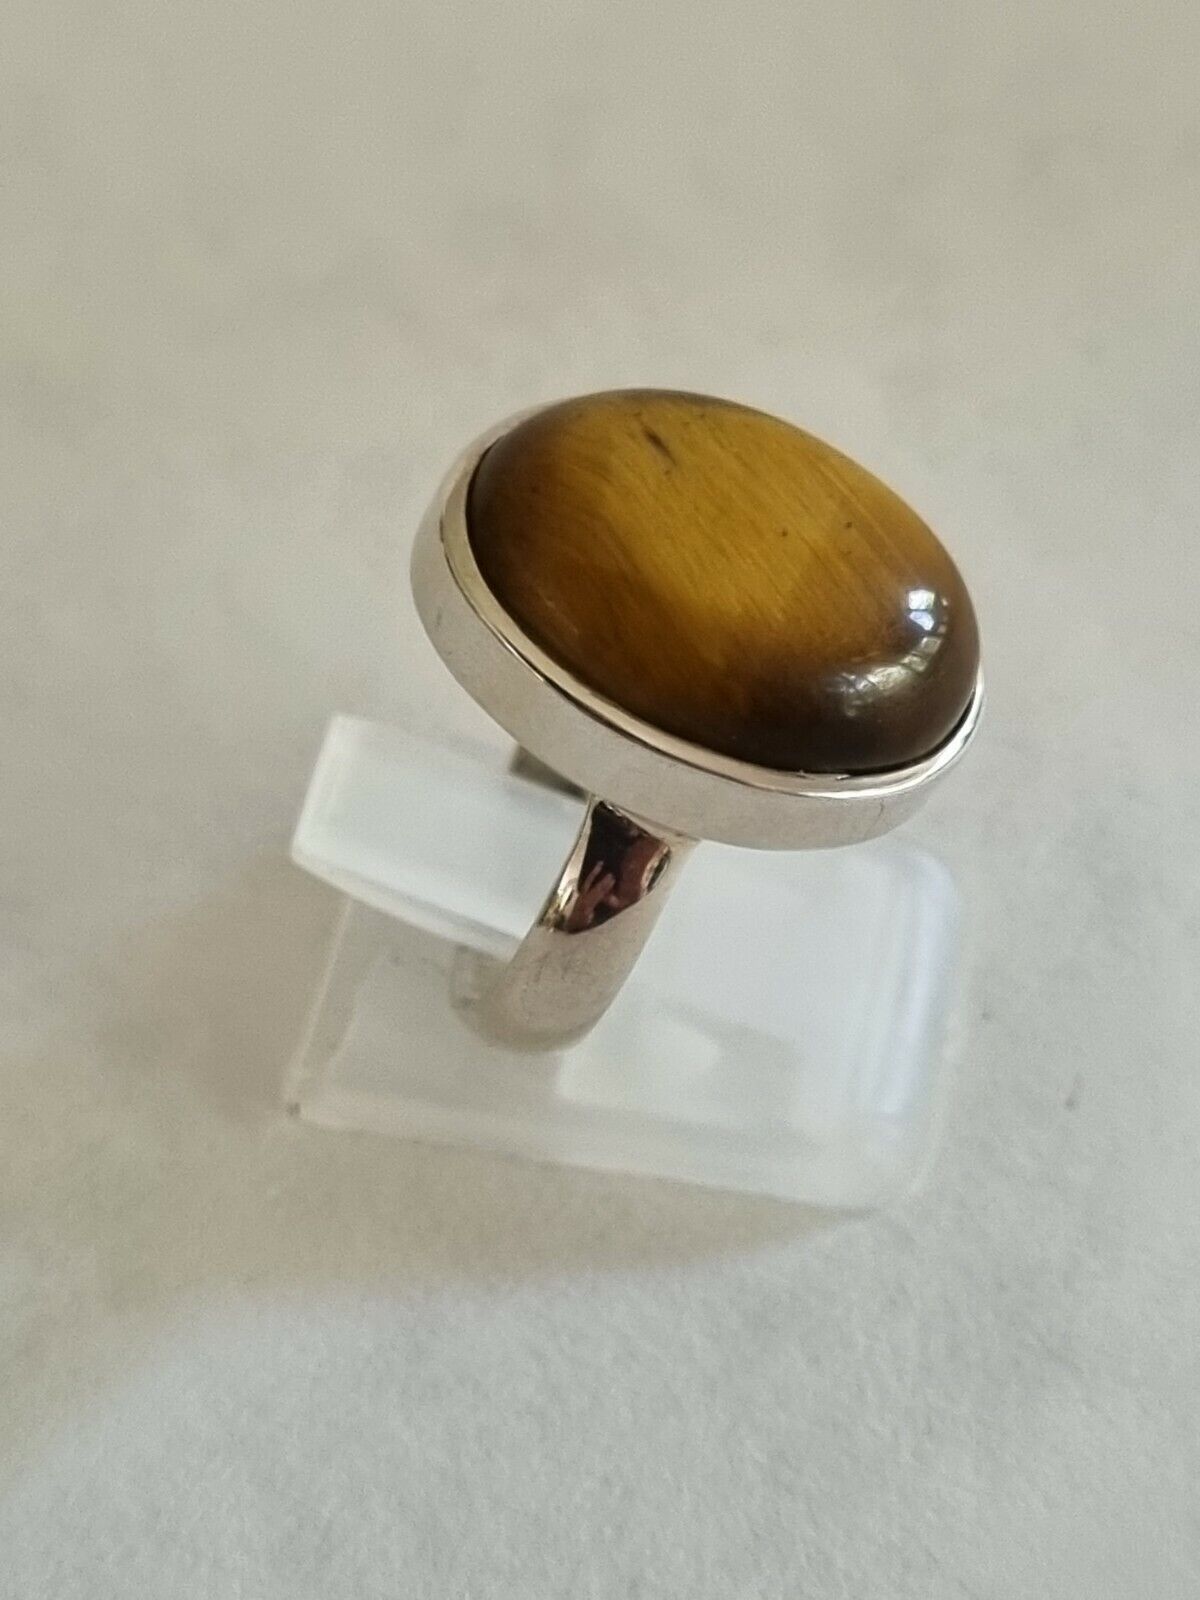 Ring Tigers Eye Ring polished crystal Gemstone sterling silver size 8.0